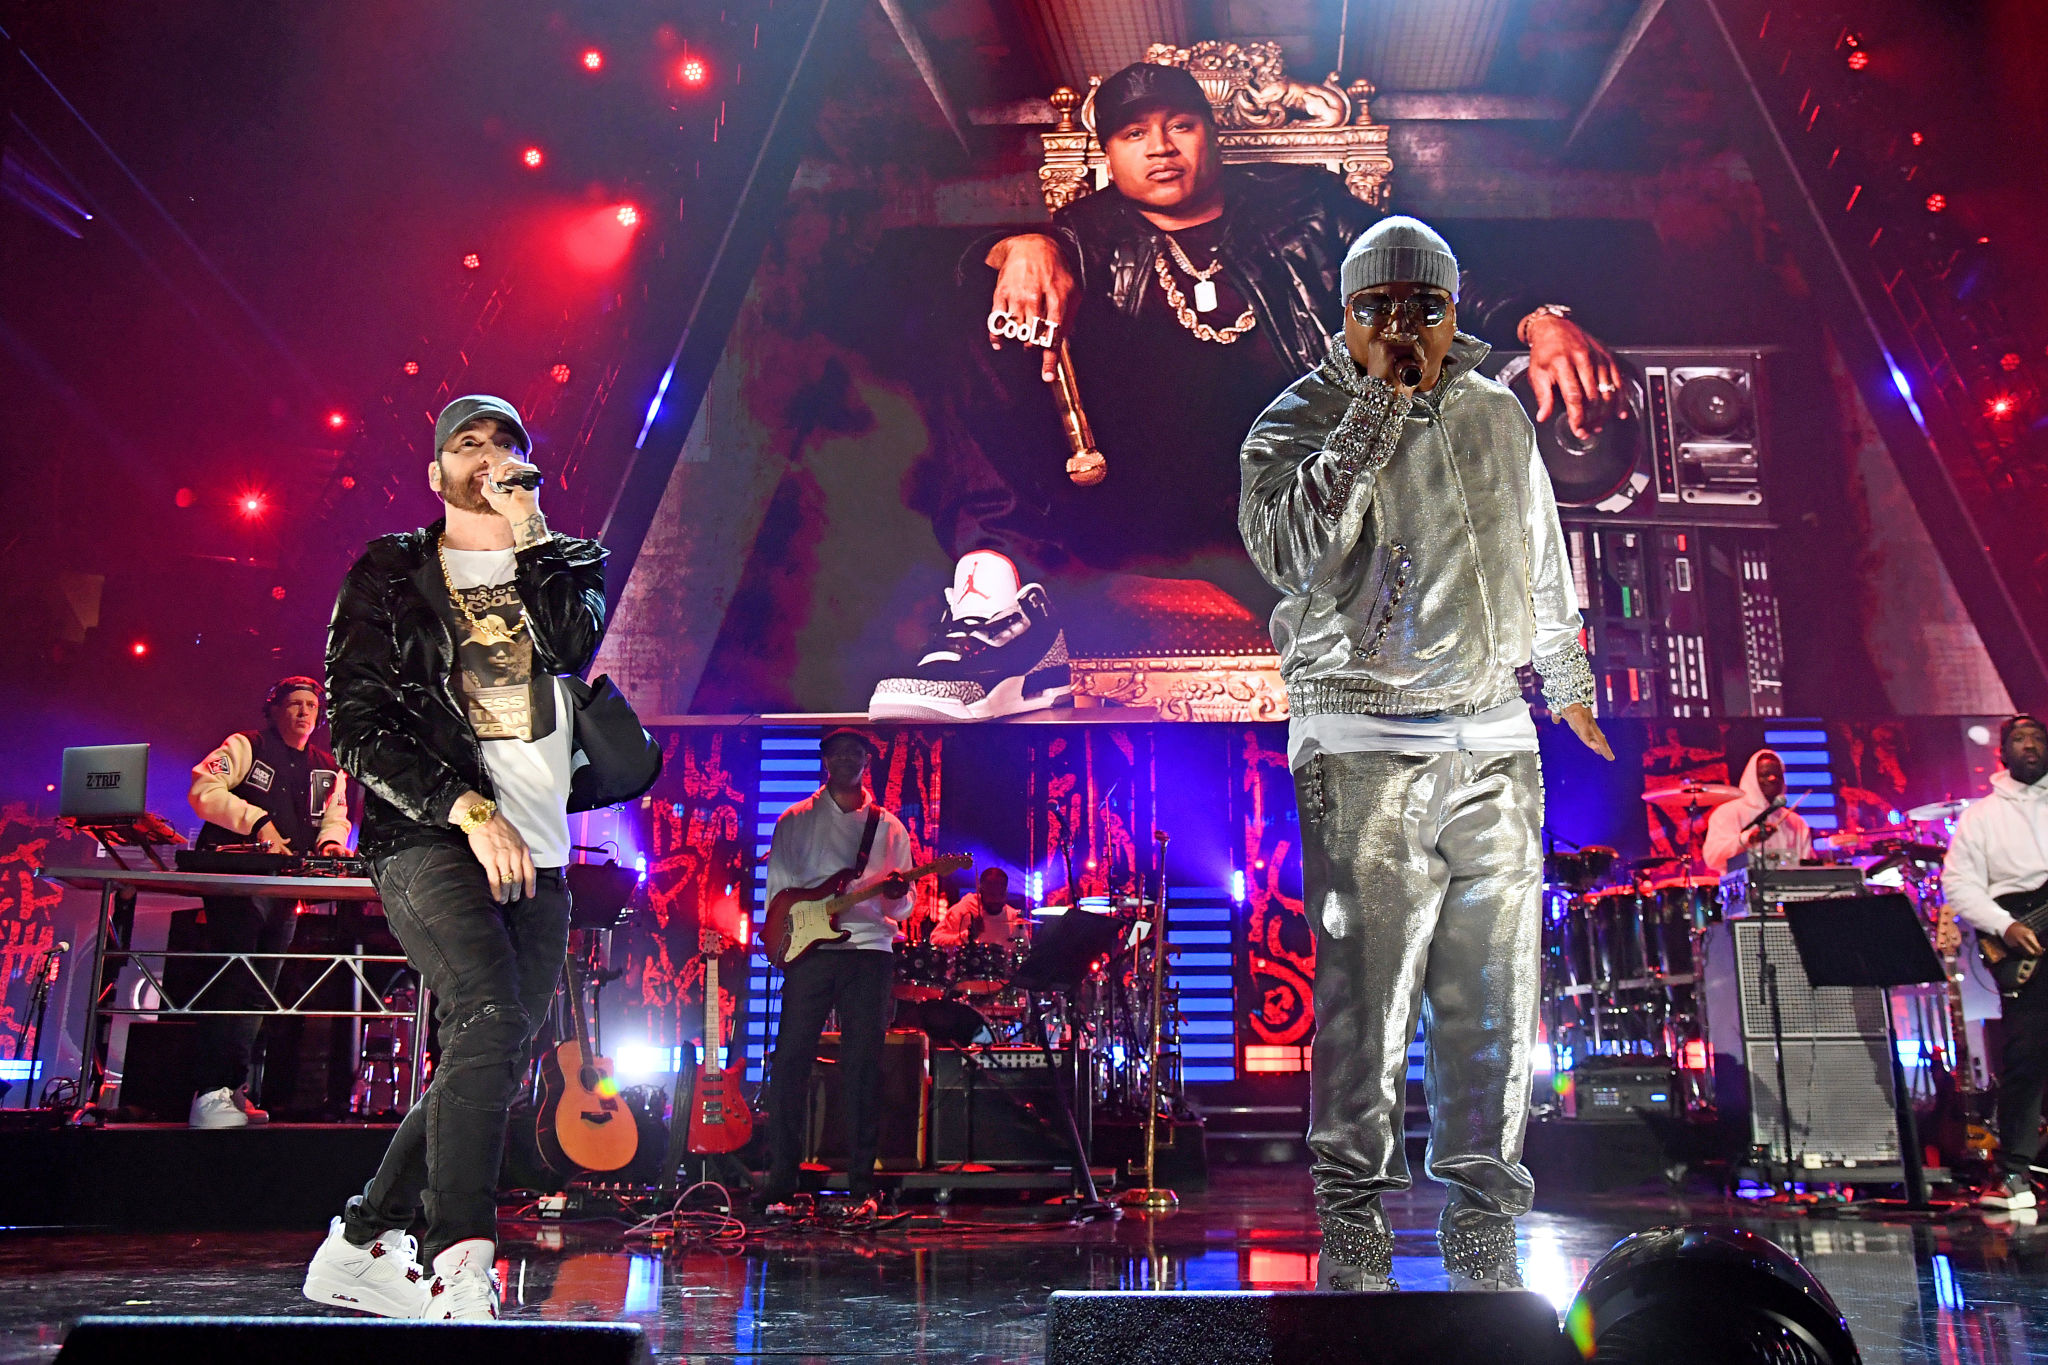 CLEVELAND, OHIO - OCTOBER 30: Eminem and LL Cool J perform onstage during the 36th Annual Rock & Roll Hall Of Fame Induction Ceremony at Rocket Mortgage Fieldhouse on October 30, 2021 in Cleveland, Ohio. (Photo by Kevin Mazur/Getty Images for The Rock and Roll Hall of Fame )